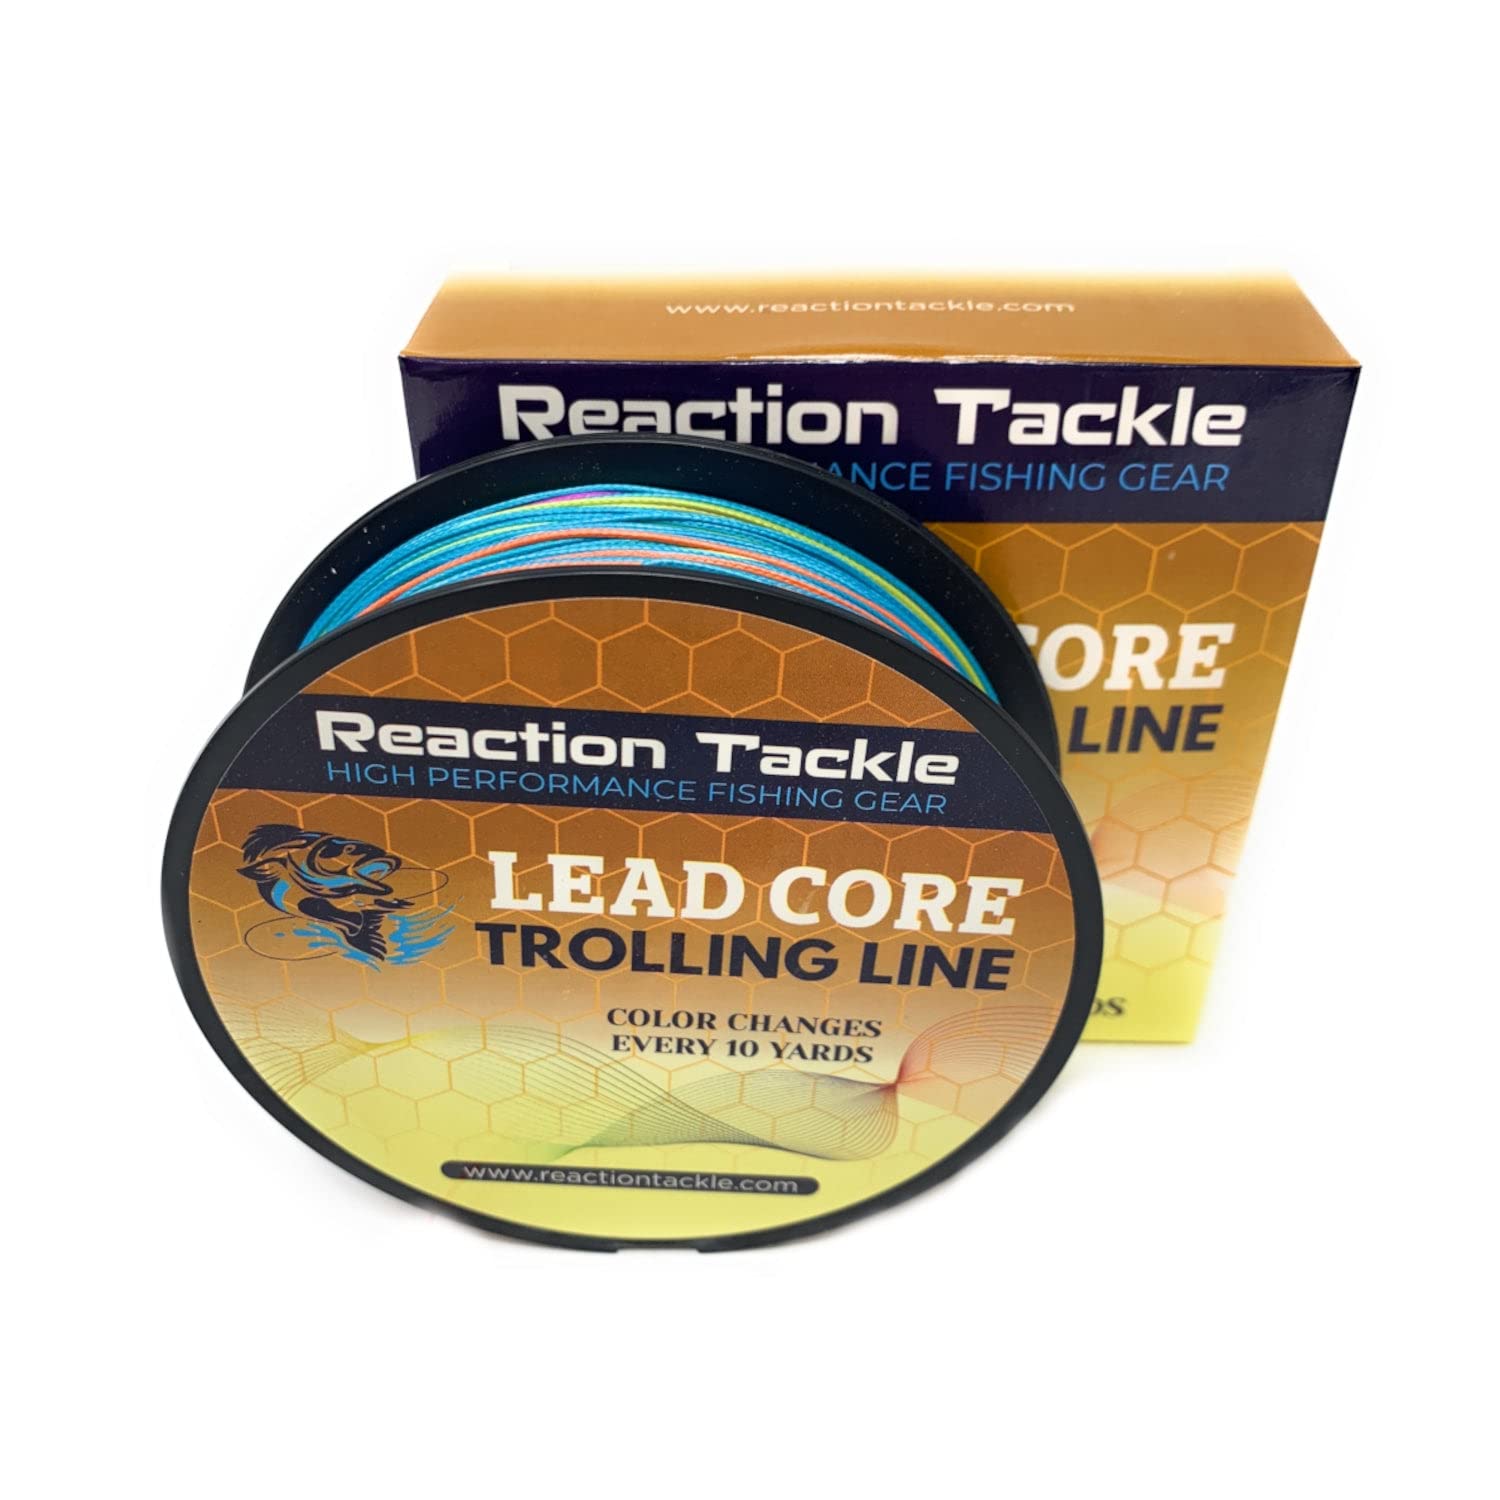 Reaction Tackle Braided Fishing Line - Pro Grade Power Performance